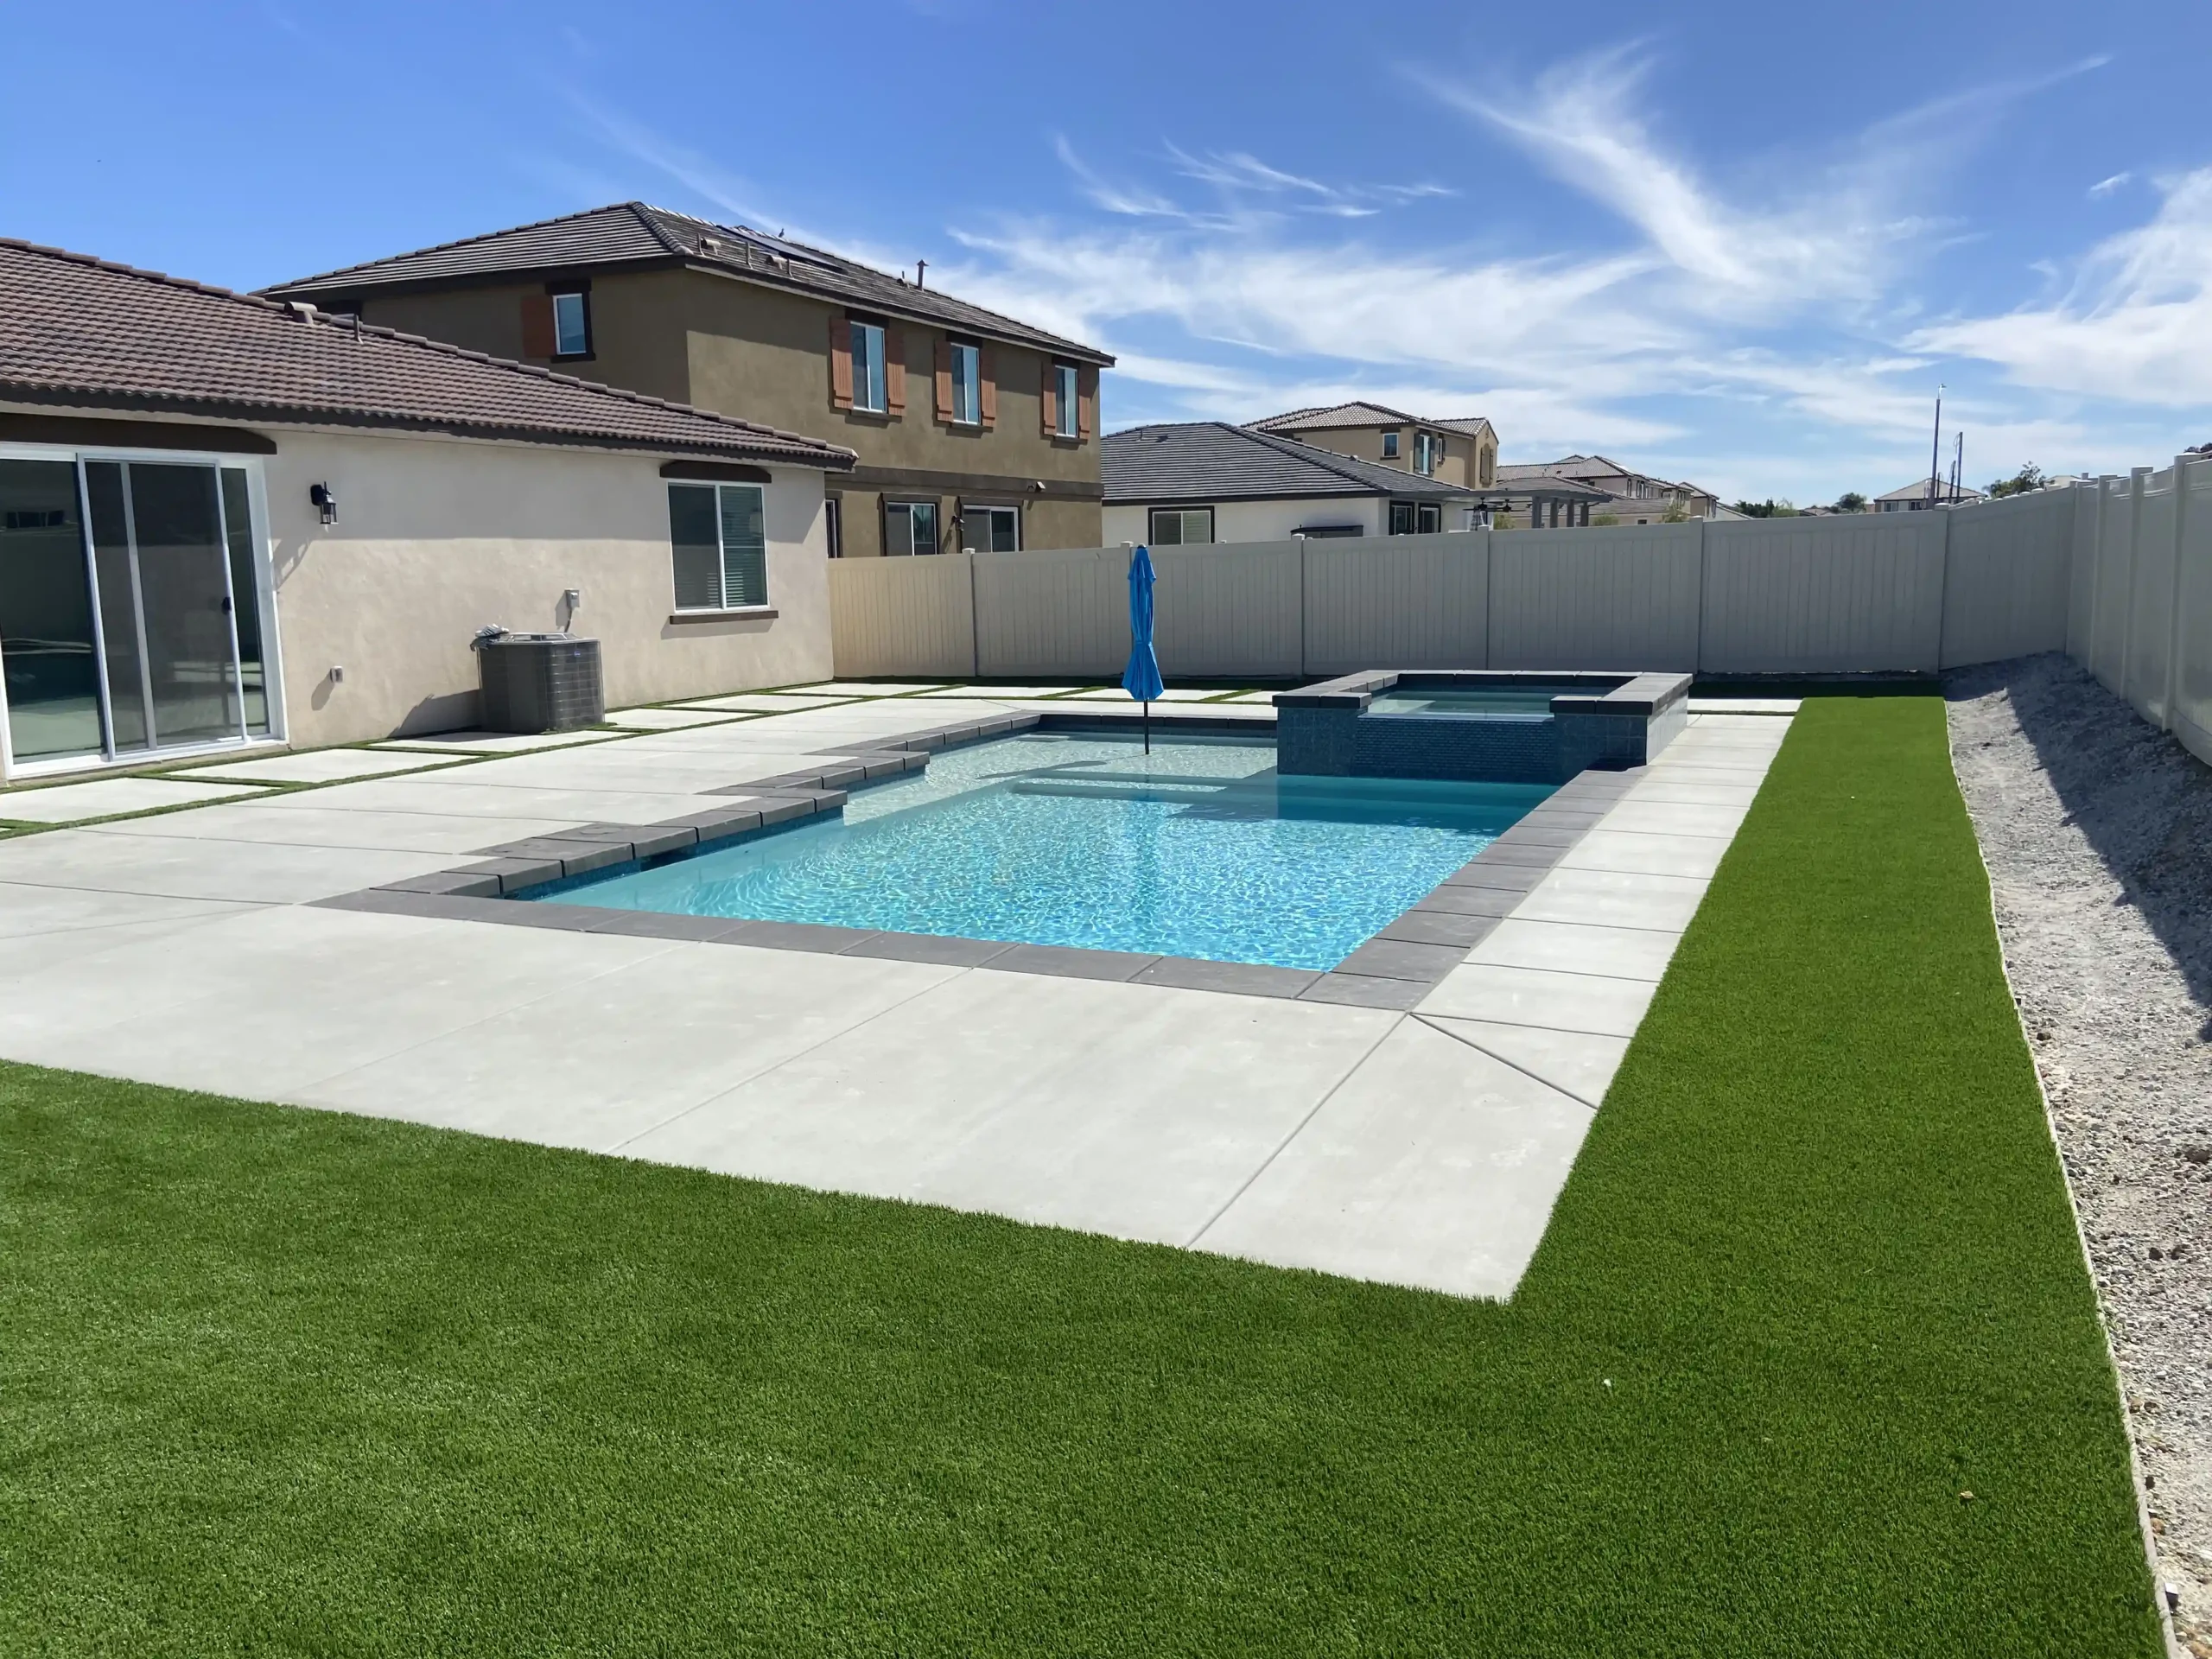 The finished project of a swimming pool with all the pool and spa installed including the pool tiles, and grass.